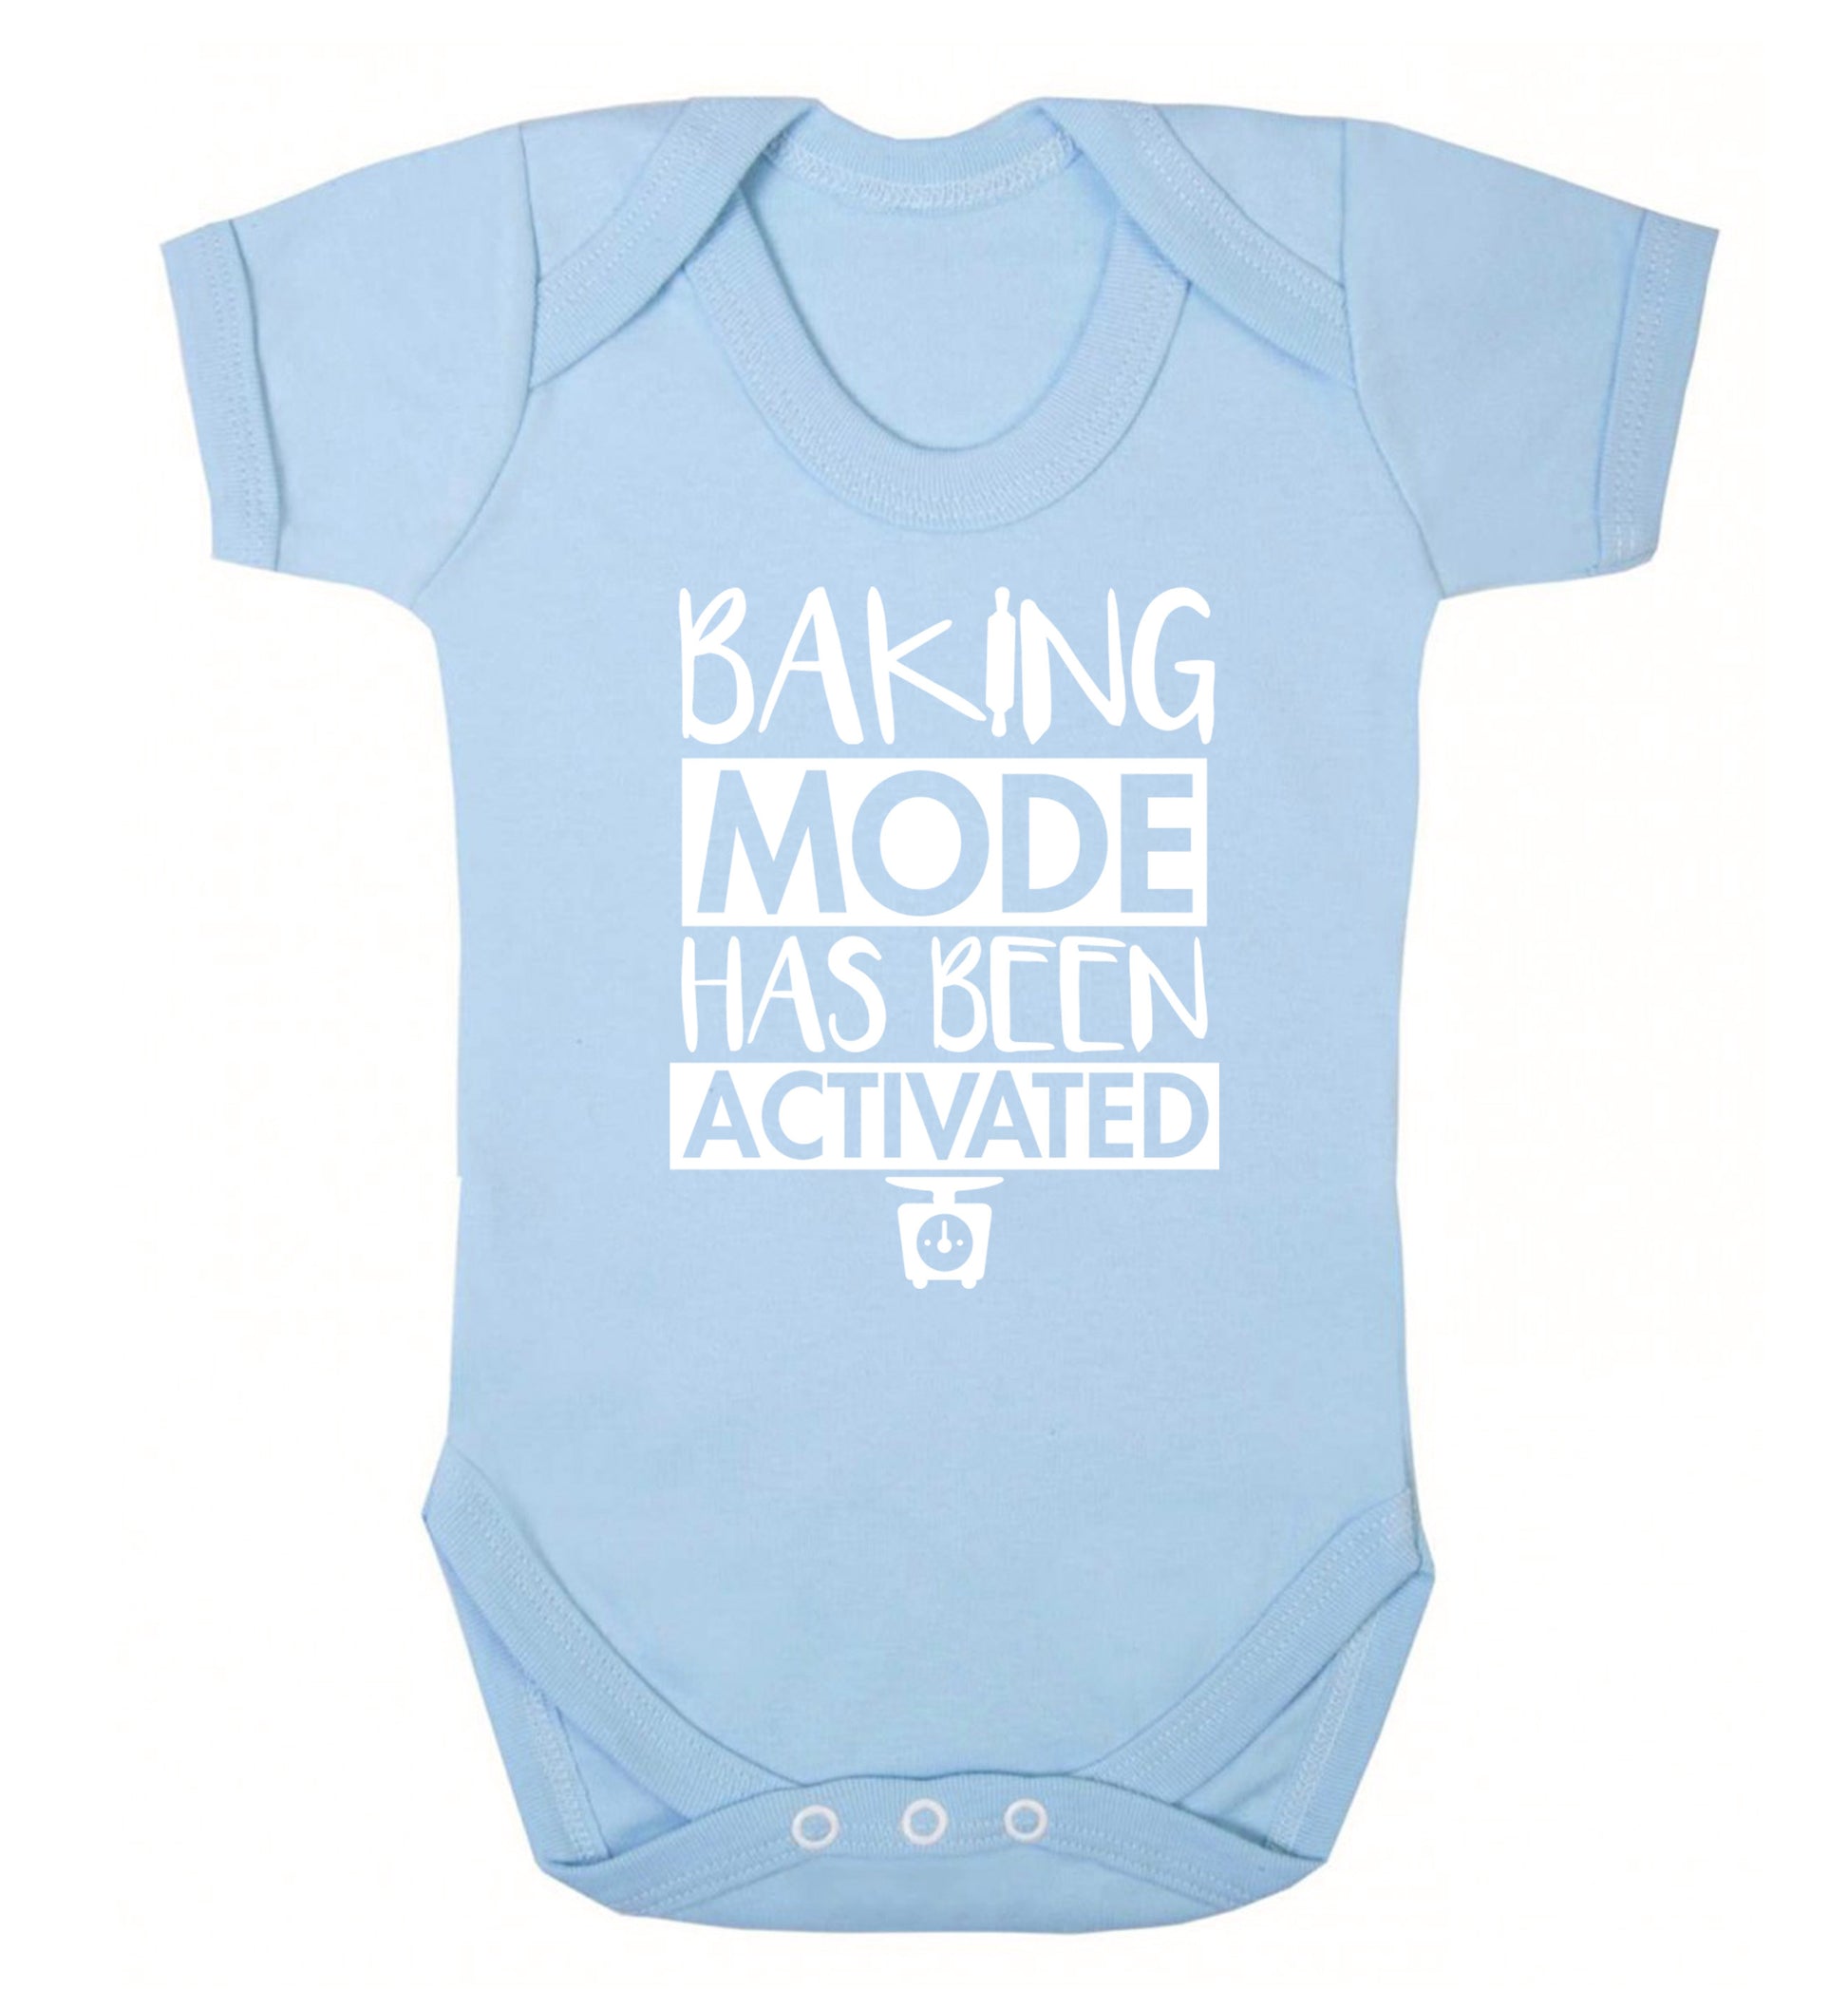 Baking mode has been activated Baby Vest pale blue 18-24 months